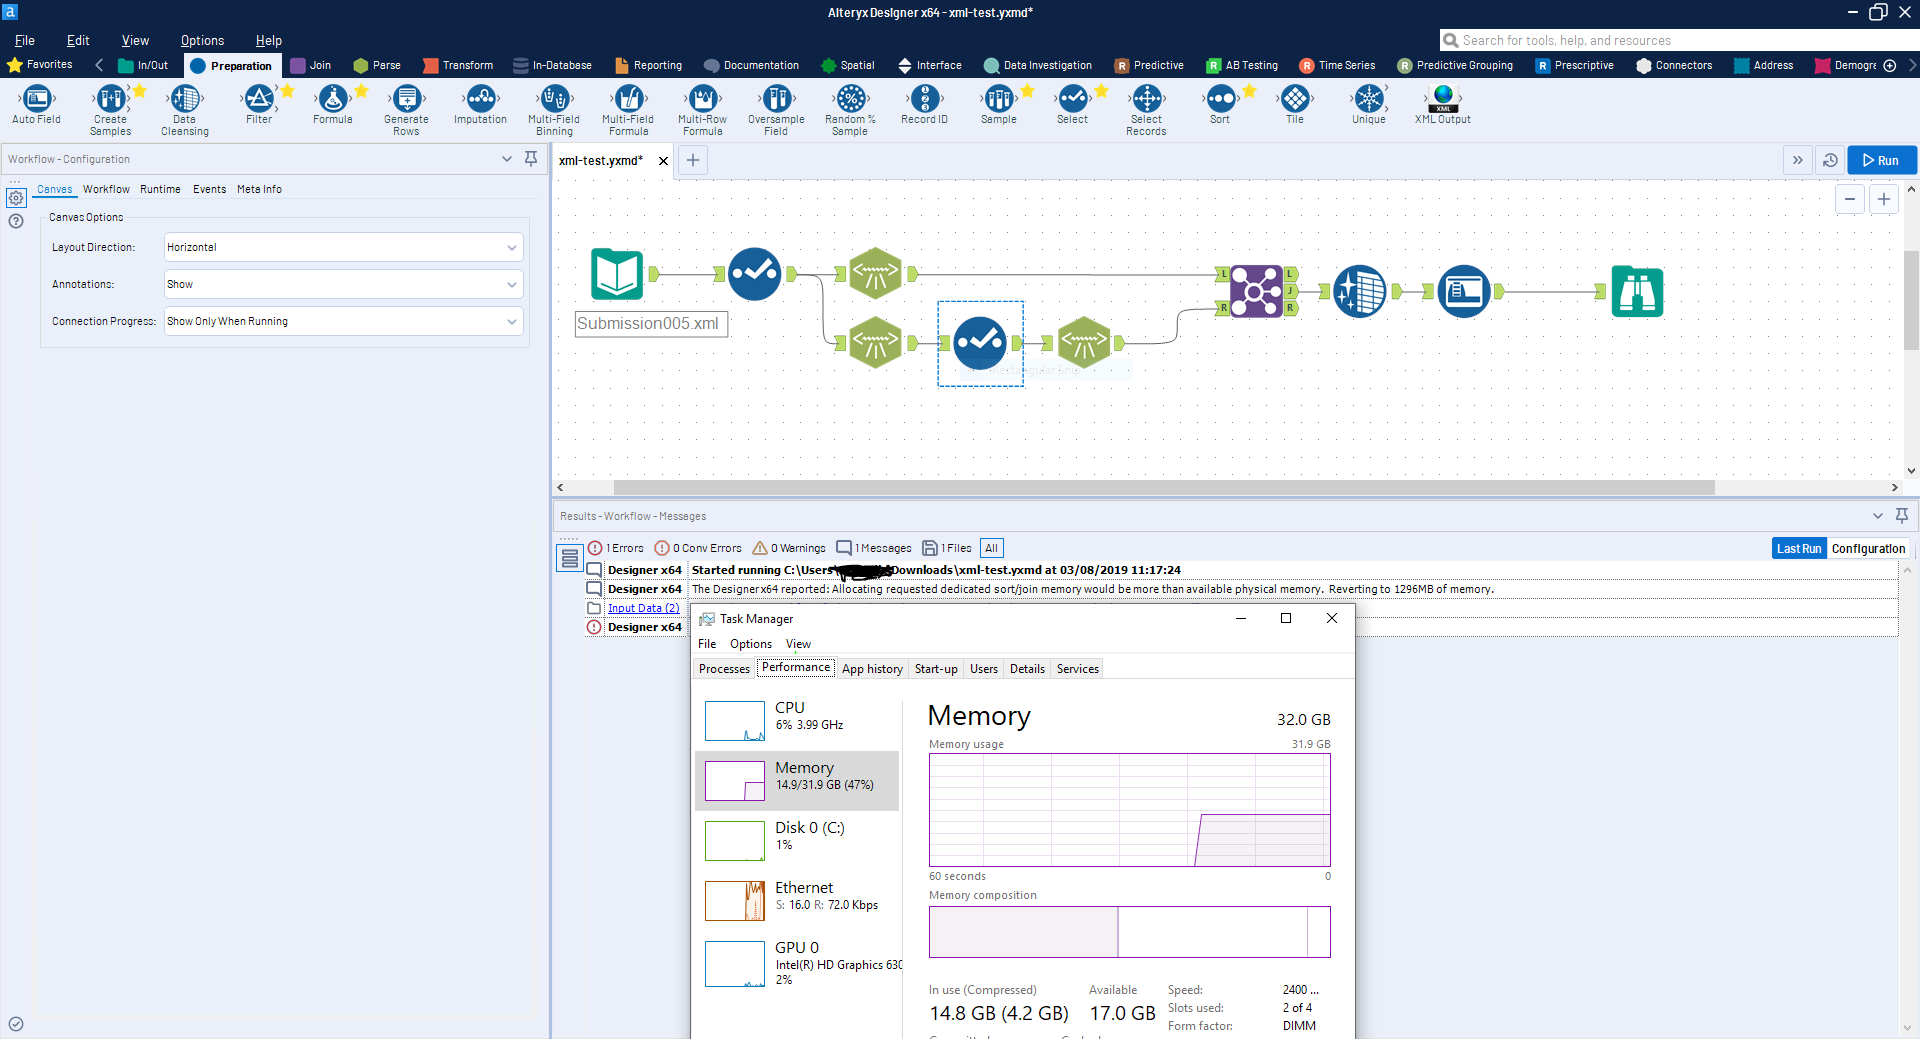 Solved Alteryx Reports Requested Dedicated Memory More Th Alteryx 8596